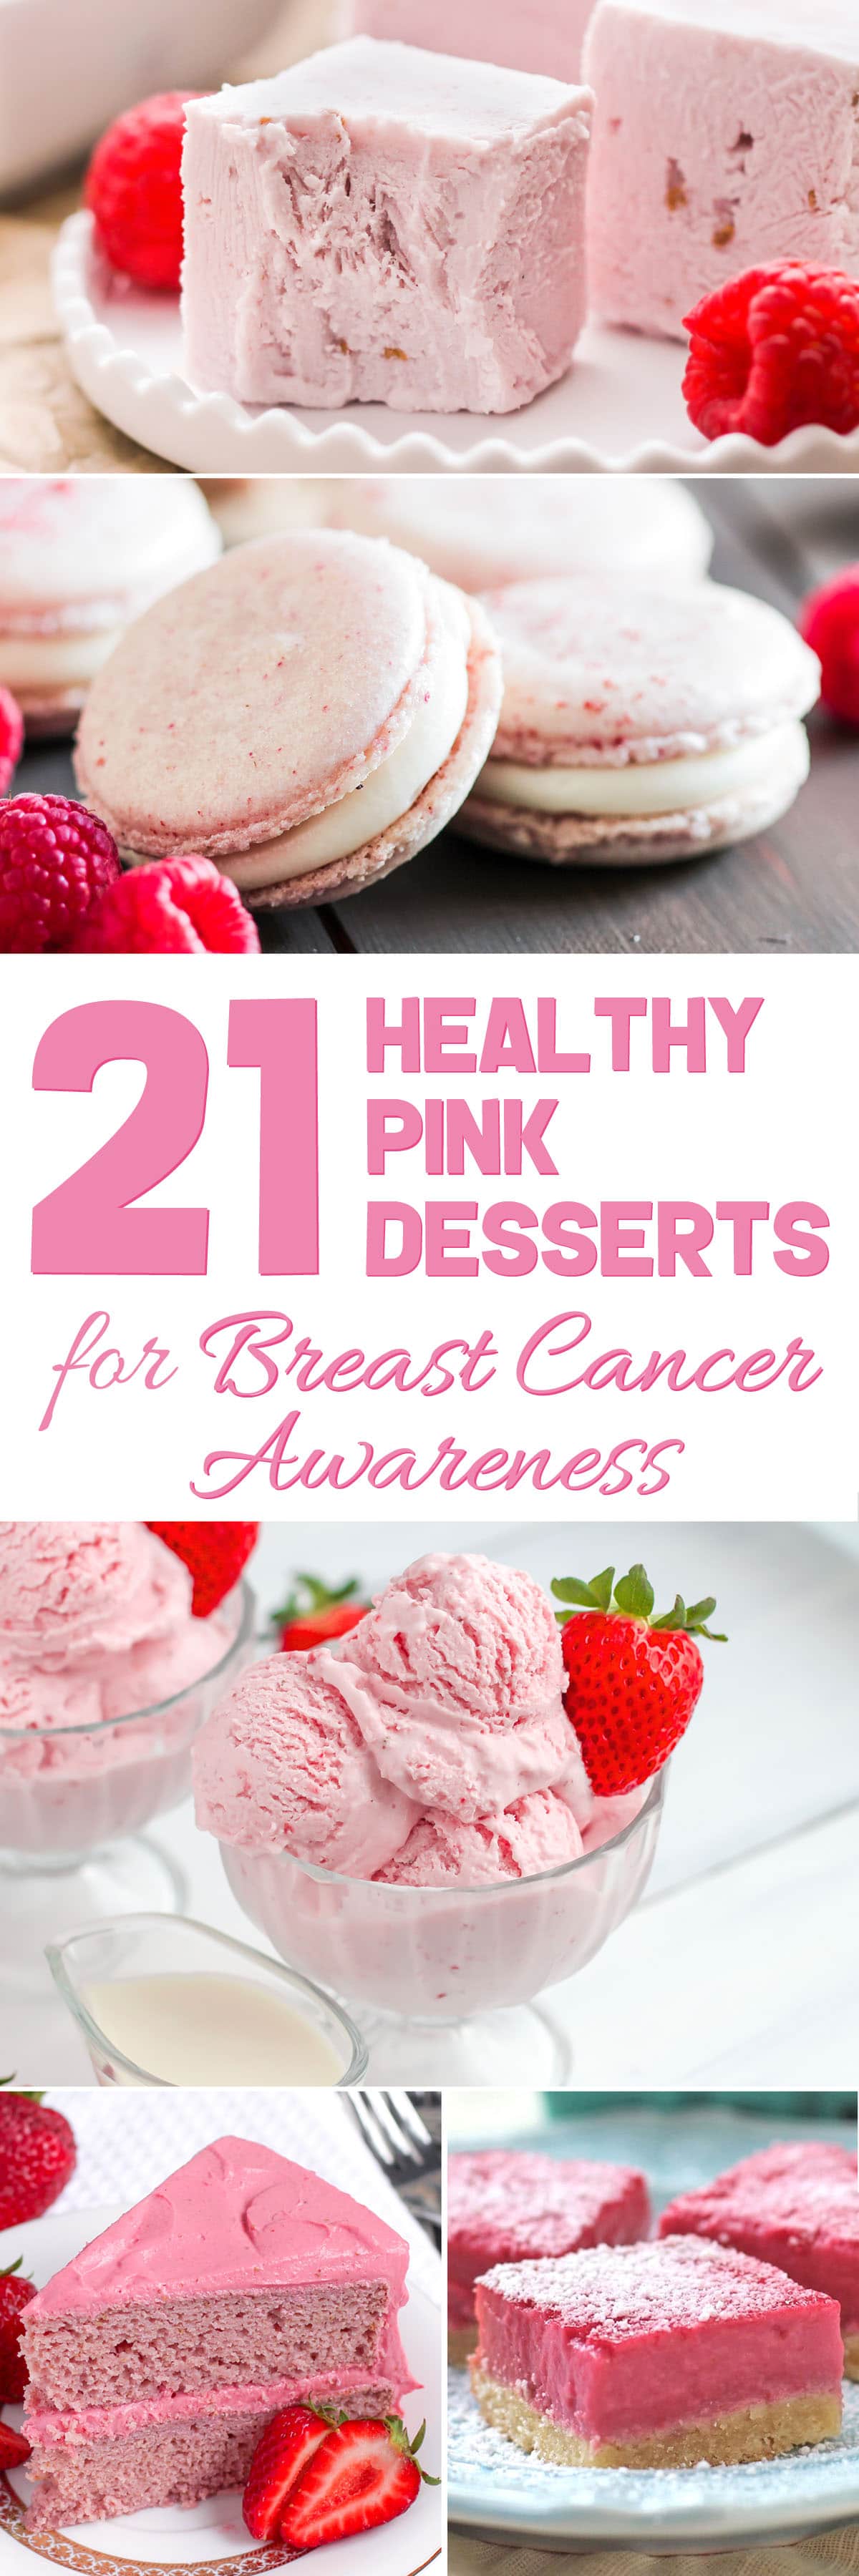 Have a pink October to honor Breast Cancer Awareness Month with these 21 healthy pink desserts! Make them for friends, family, neighbors, a school convention, fundraiser, or yourself! Cake to cupcakes to ice cream to milkshakes and more. Options for everyone: sugar free, low carb, low fat, high protein, high fiber, whole grain, gluten free, dairy free, vegan, paleo, or keto. #glutenfreedessert #vegandessert #highprotein #healthycake #glutenfreecake #sugarfreecake #lowcarbicecream #ketofudge